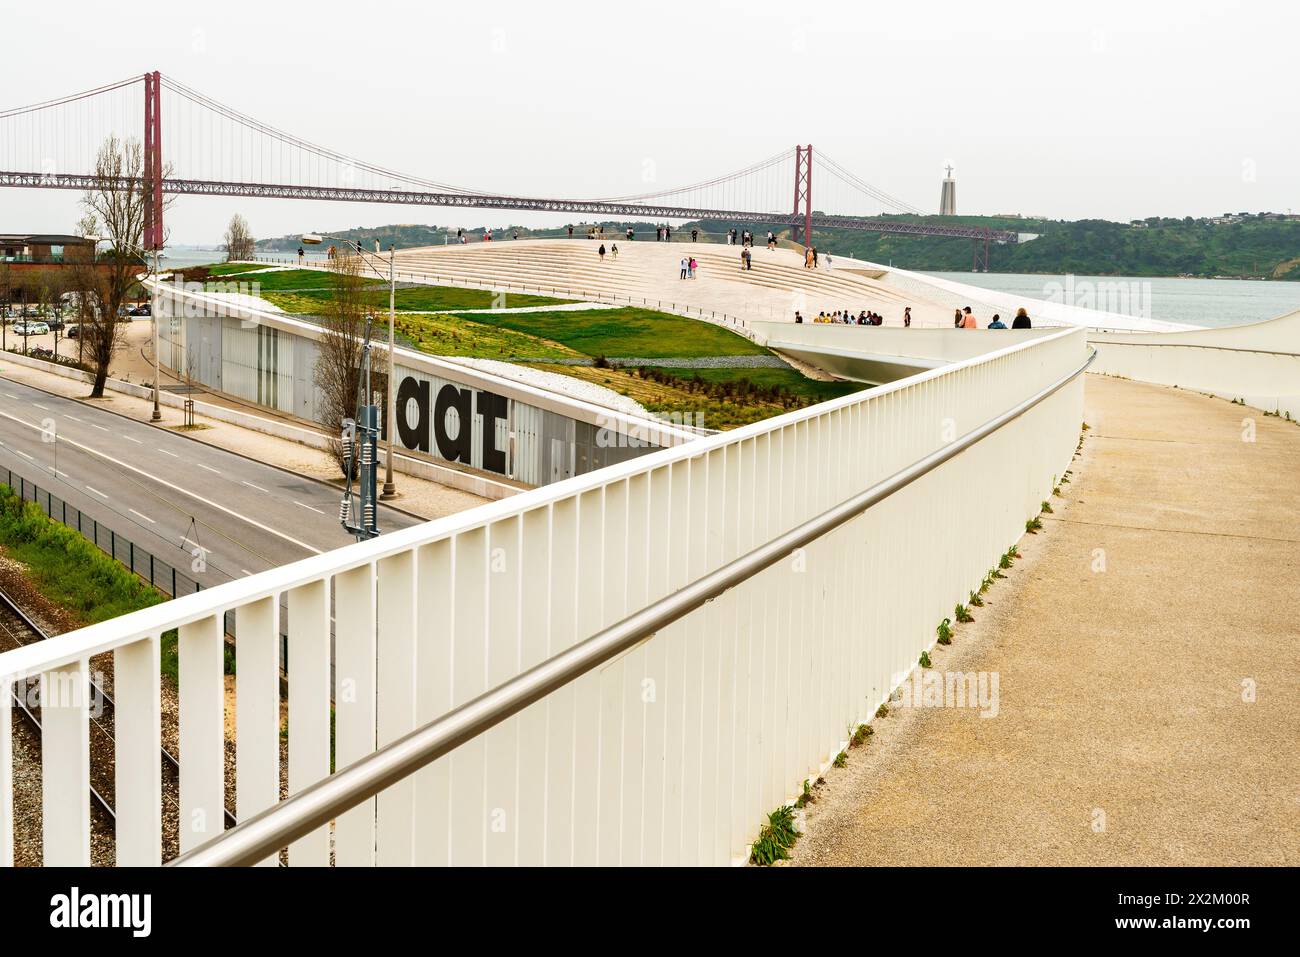 The Maat museum or The Museum of Art, Architecture and Technology in Lisbon. The museum is designed by Amanda Levete Architects is located in Belém, L Stock Photo